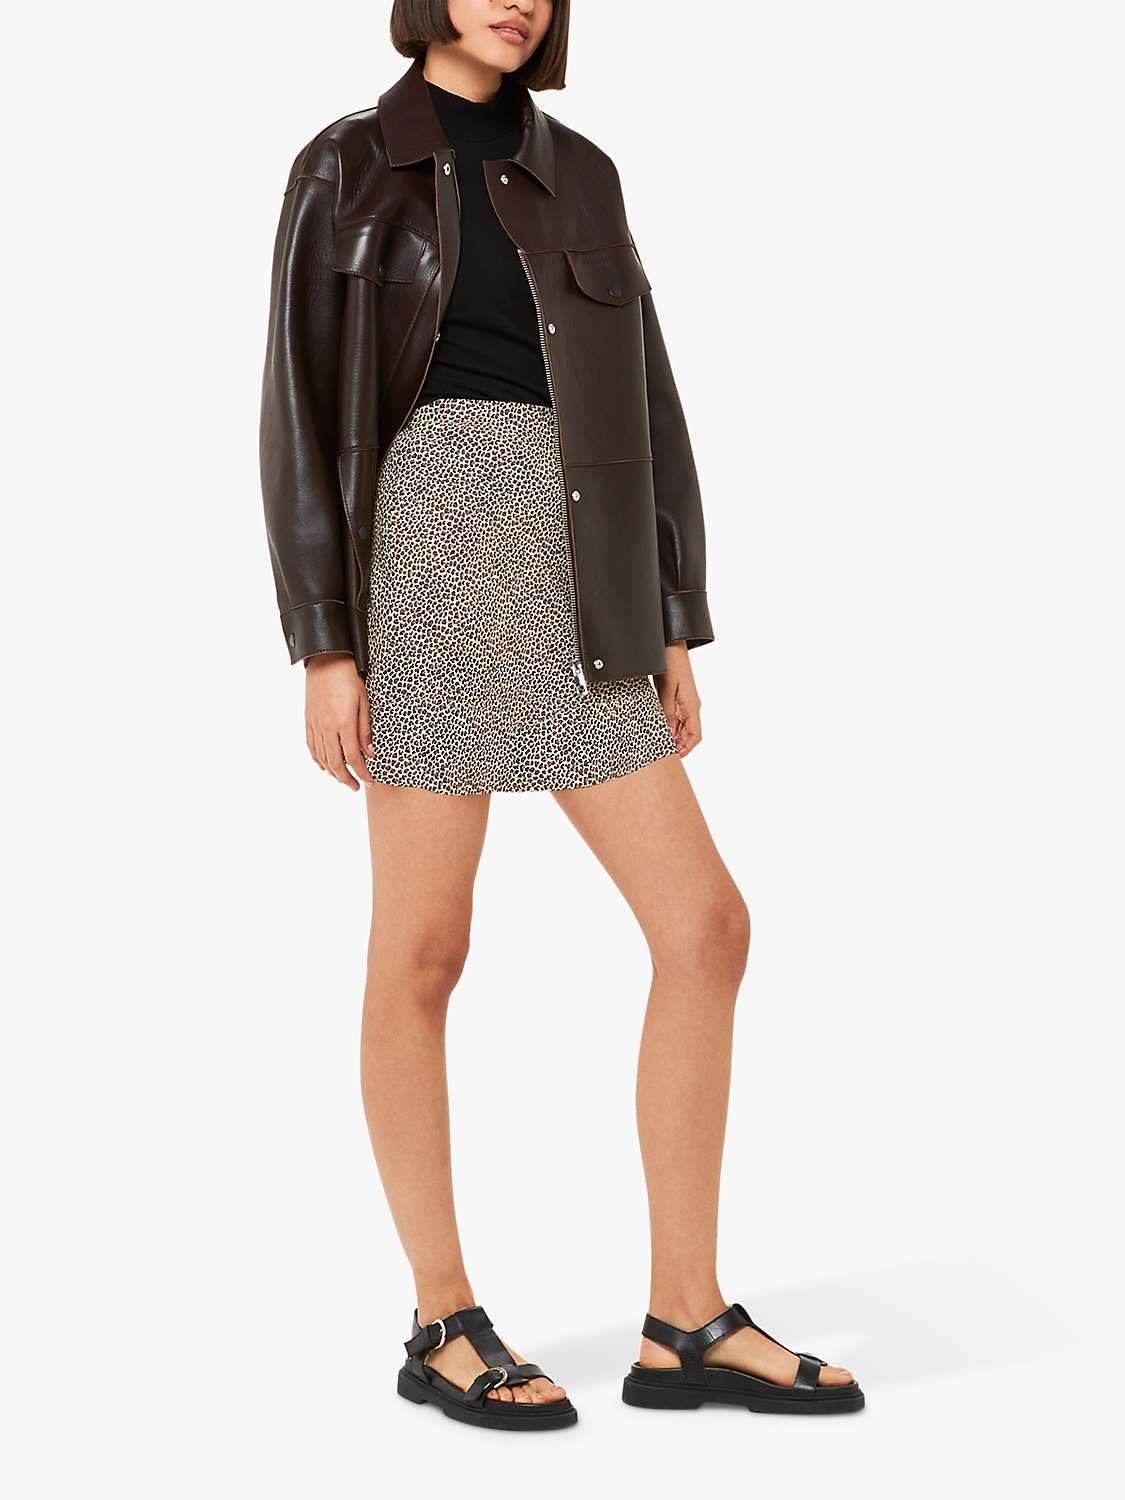 Buy Whistles Dashed Leopard Print Mini Skirt, Brown Online at johnlewis.com